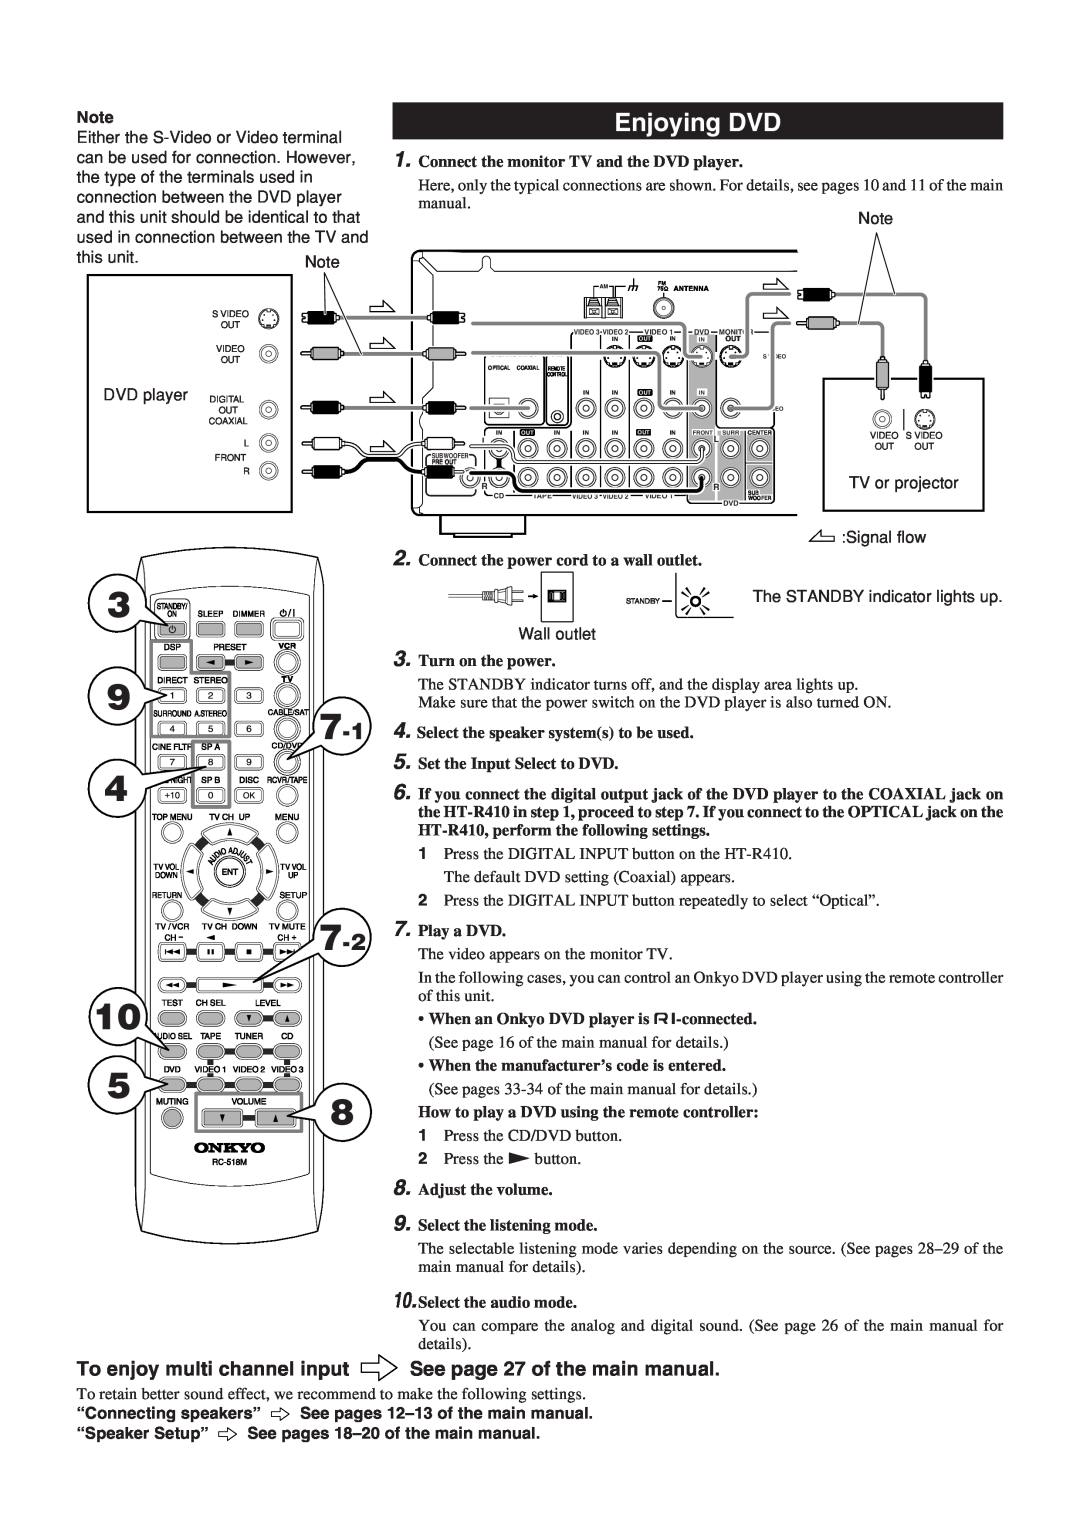 Onkyo HT-R410 instruction manual Enjoying DVD, “Speaker Setup” See pages 18-20of the main manual 